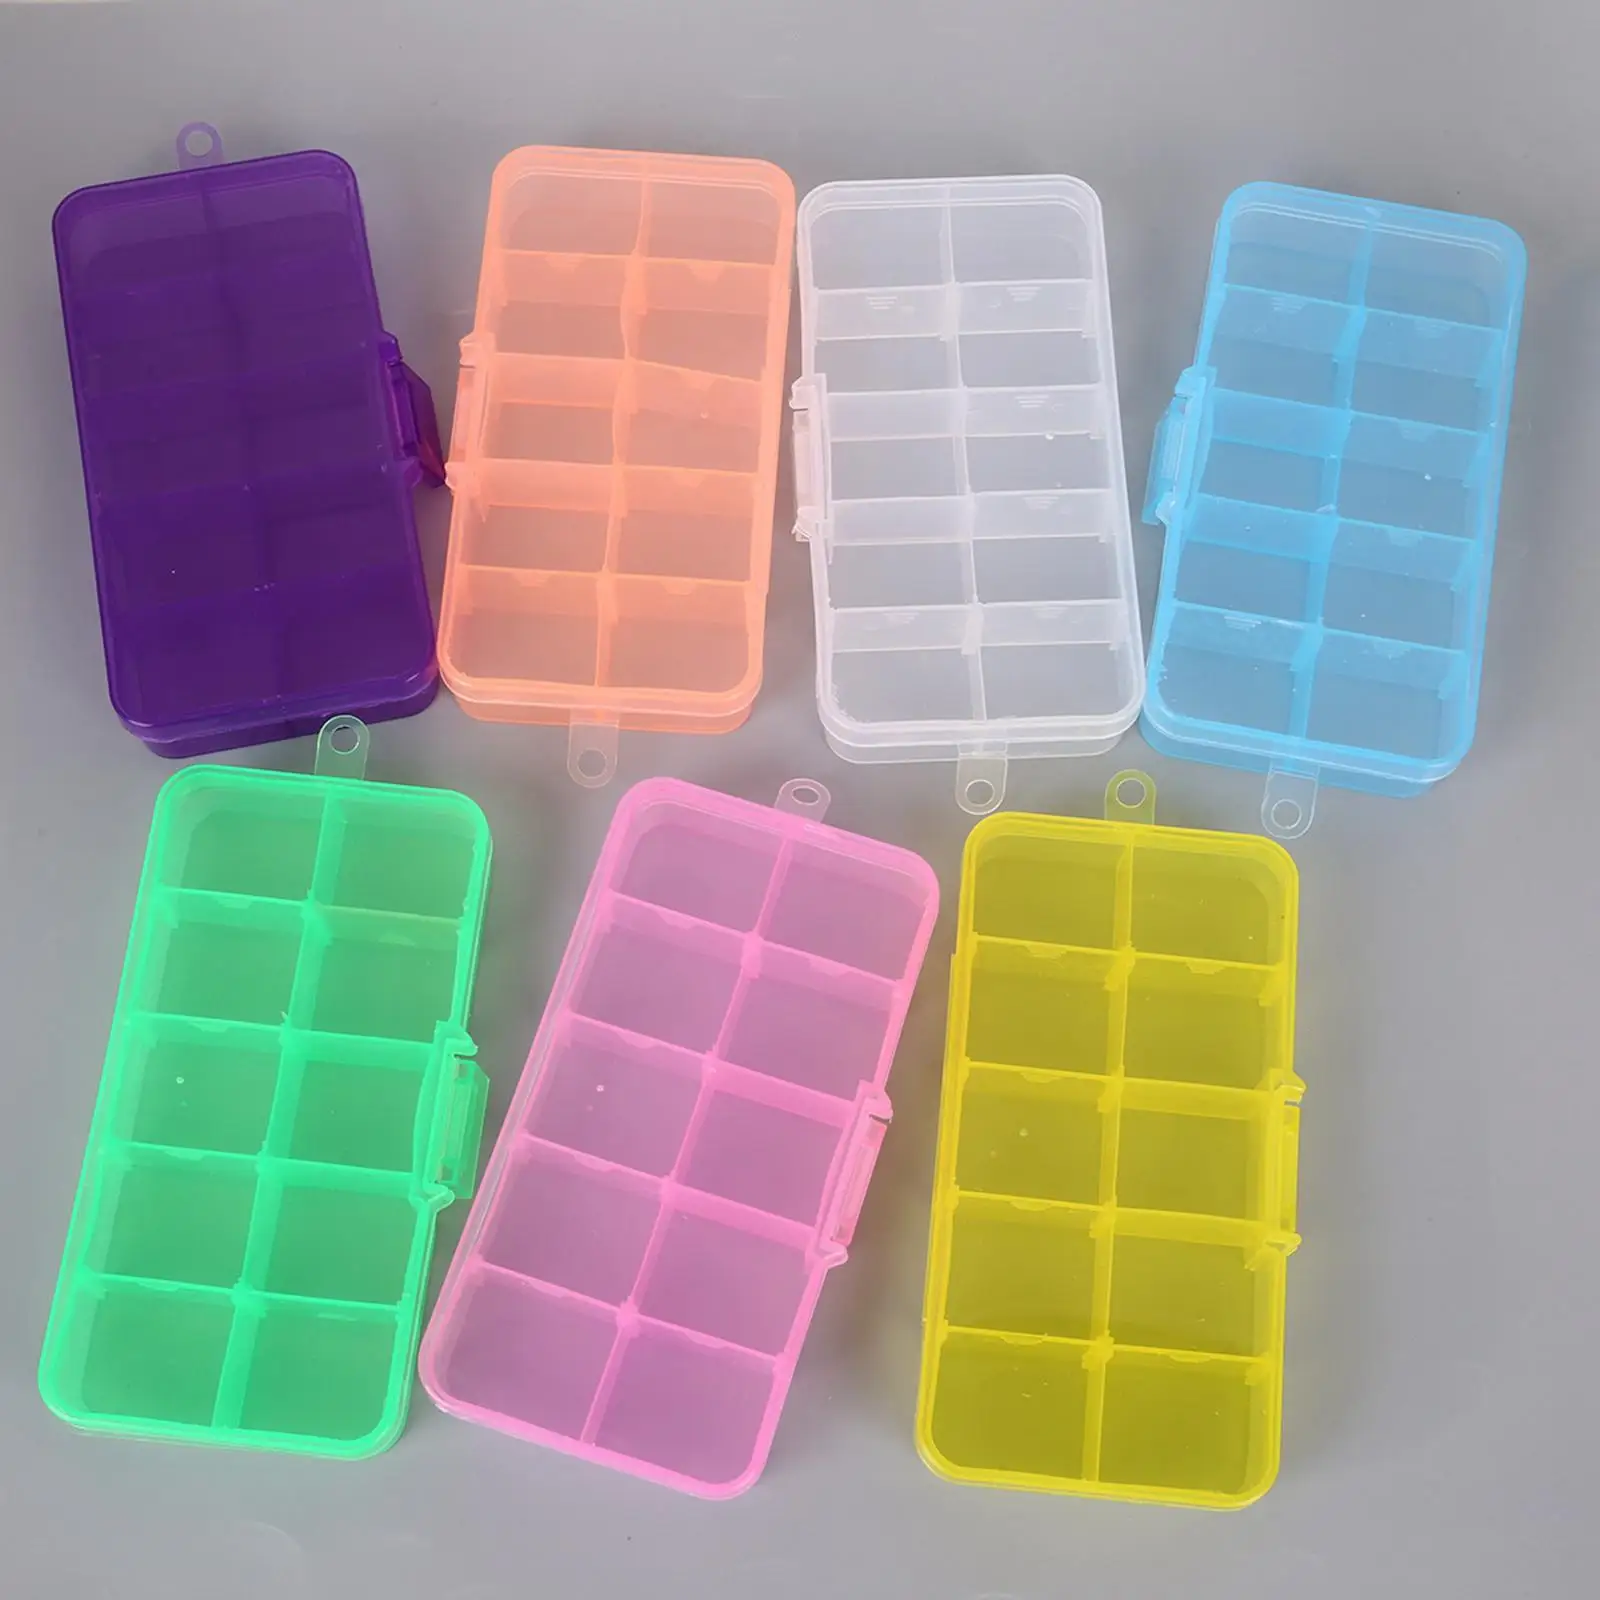 10 Slots Plastic Storage Jewelry Box Case Portable Compact Sturdy for Women